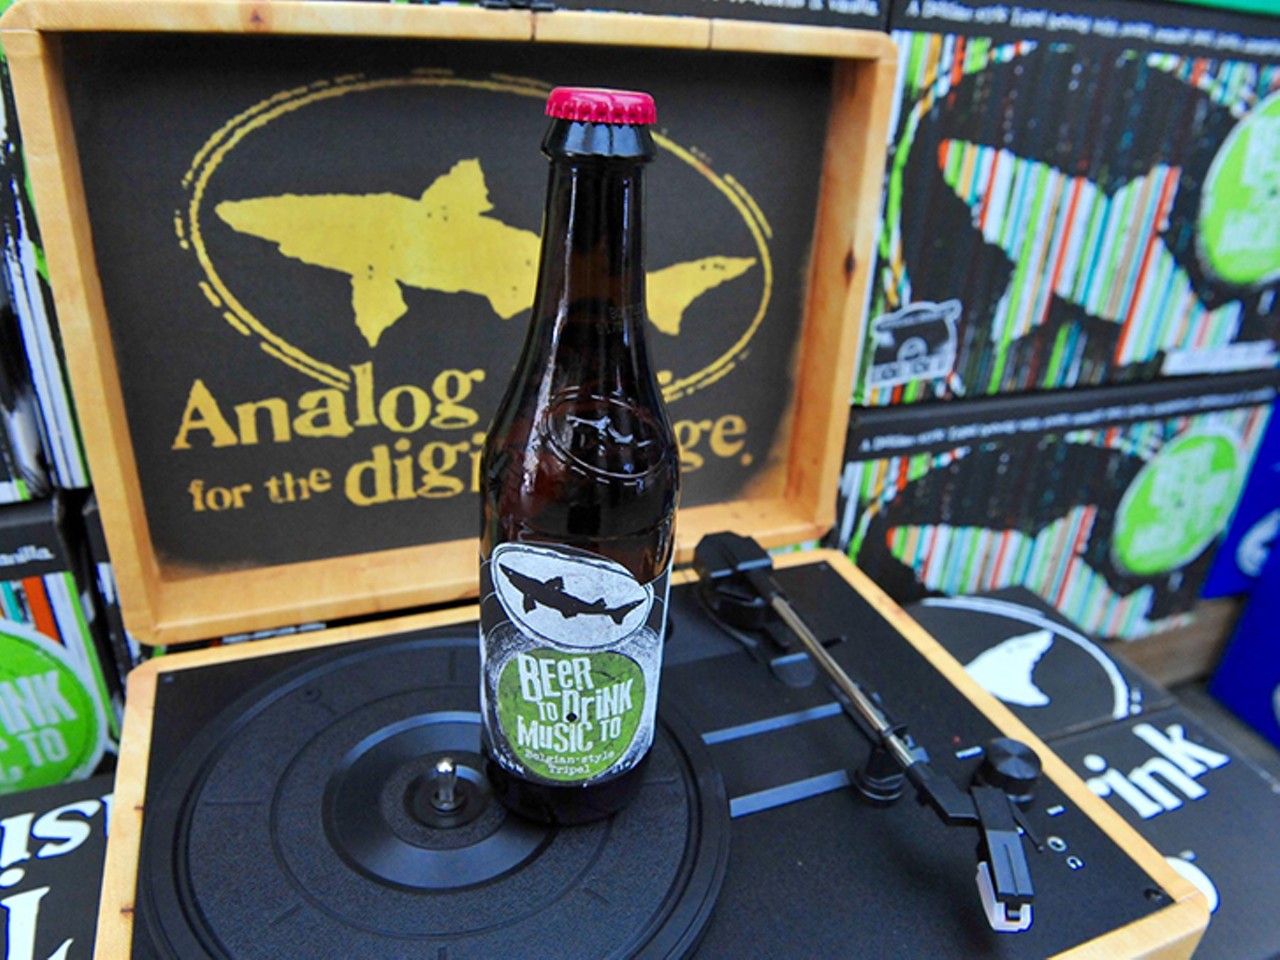 Saturday, April 16Dogfish Head National Record Store Day at World of Beer - Downtown